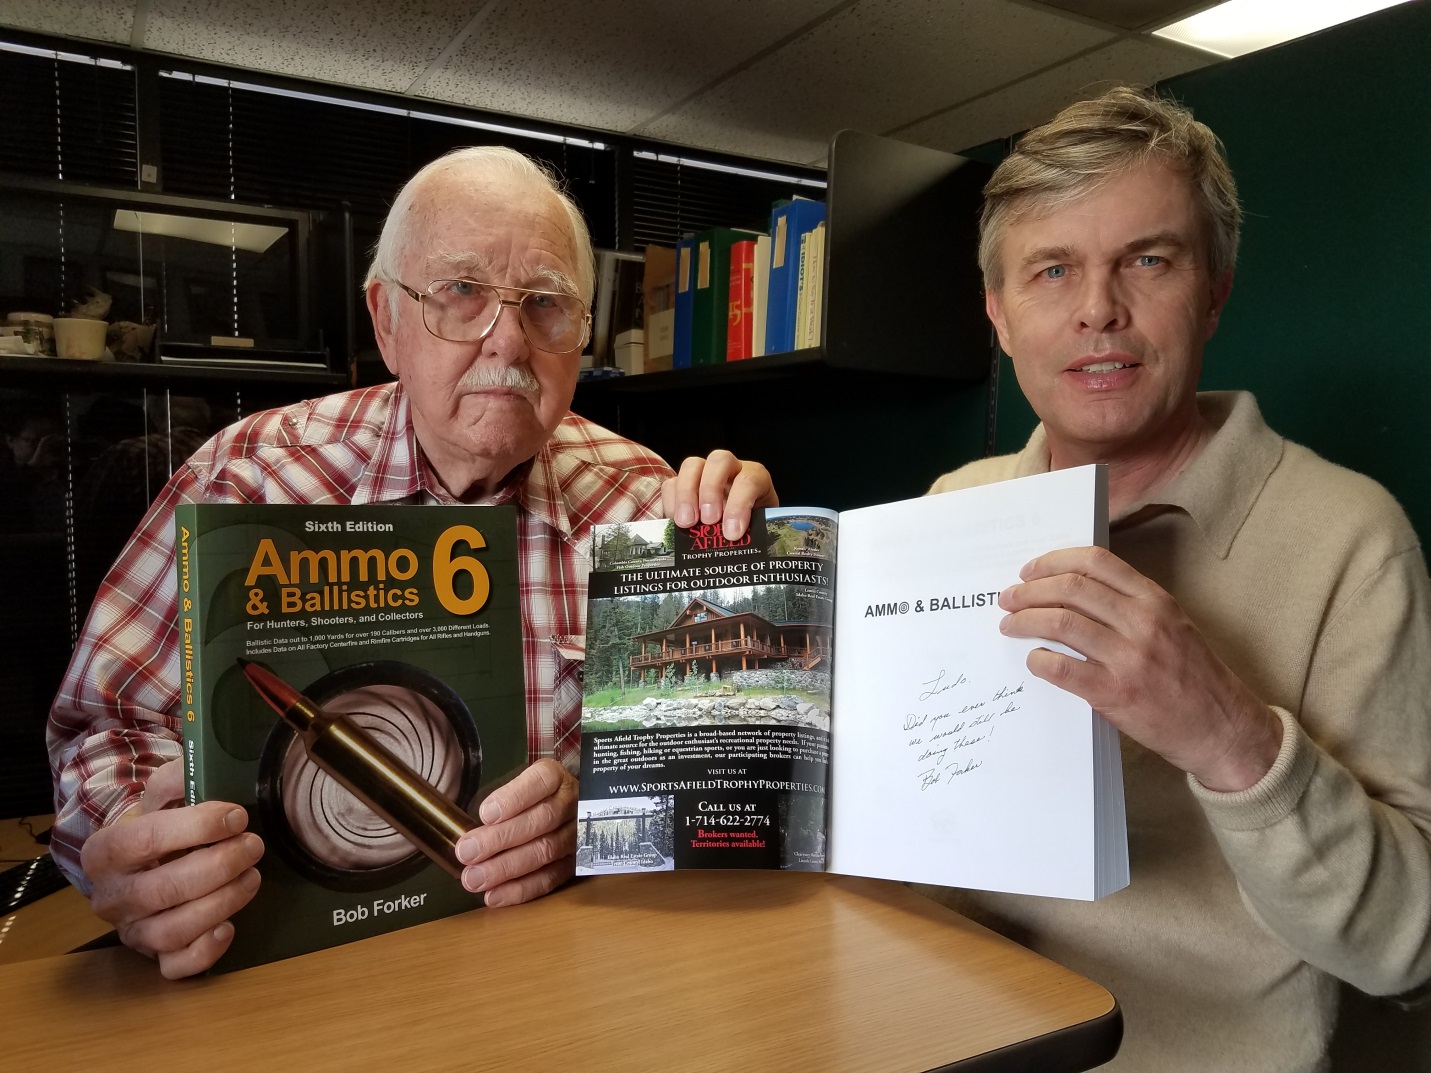 Robert Forker signing a copy of Ammo and Ballistics 6